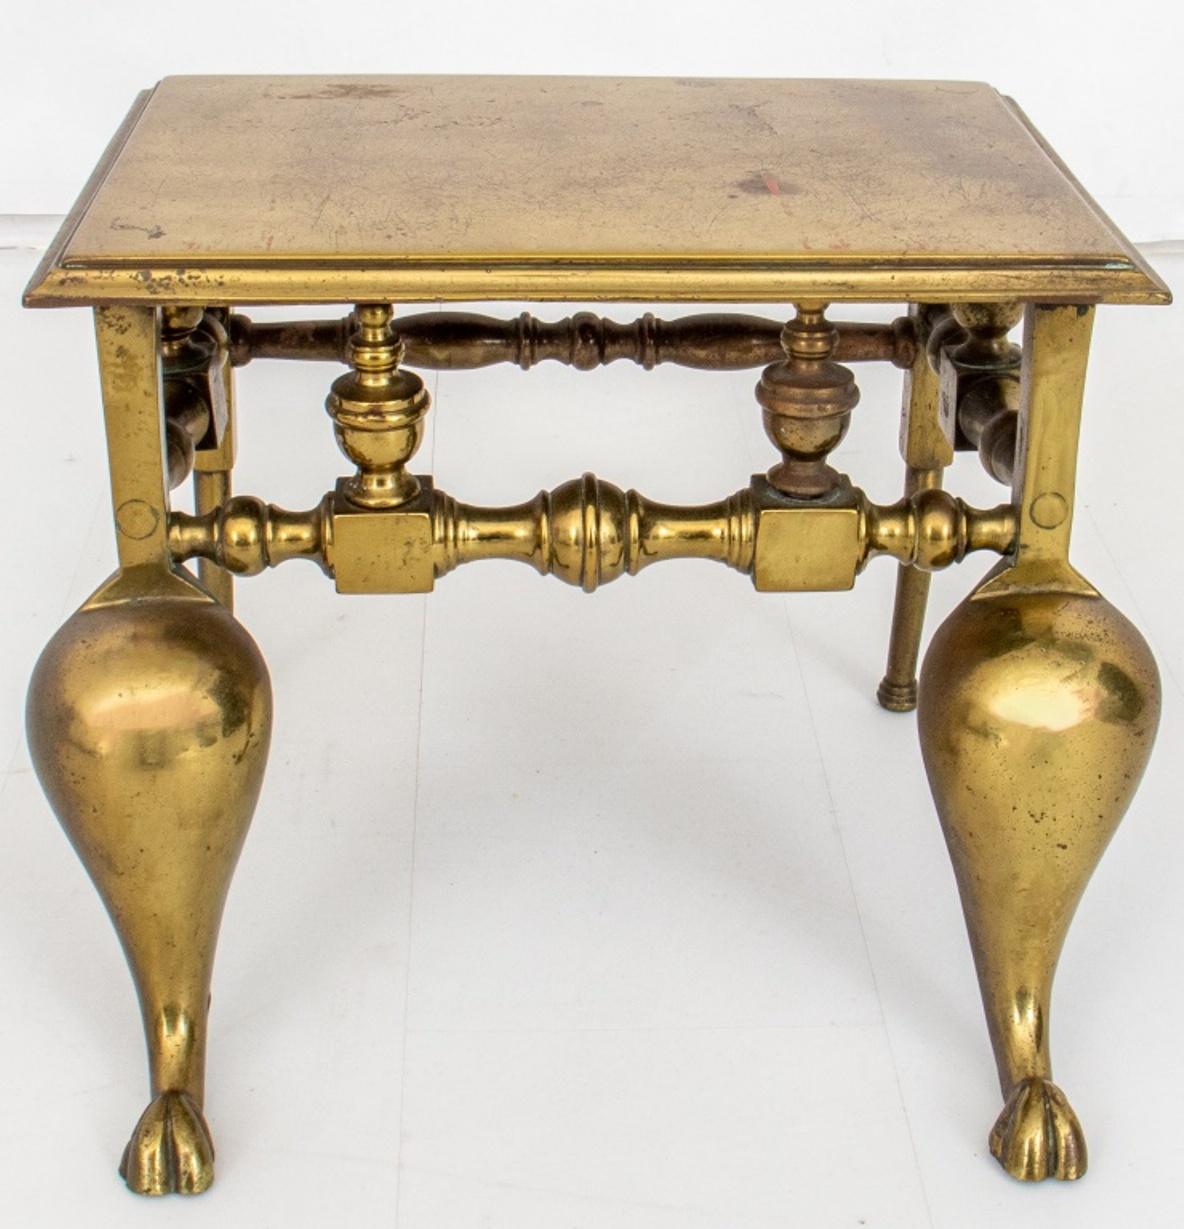 George III period English Brass Hearth Bench or Warmer, 18th or 19th C, of typical form, rectangular with handles above cabriole legs. 

Dimensions: 12